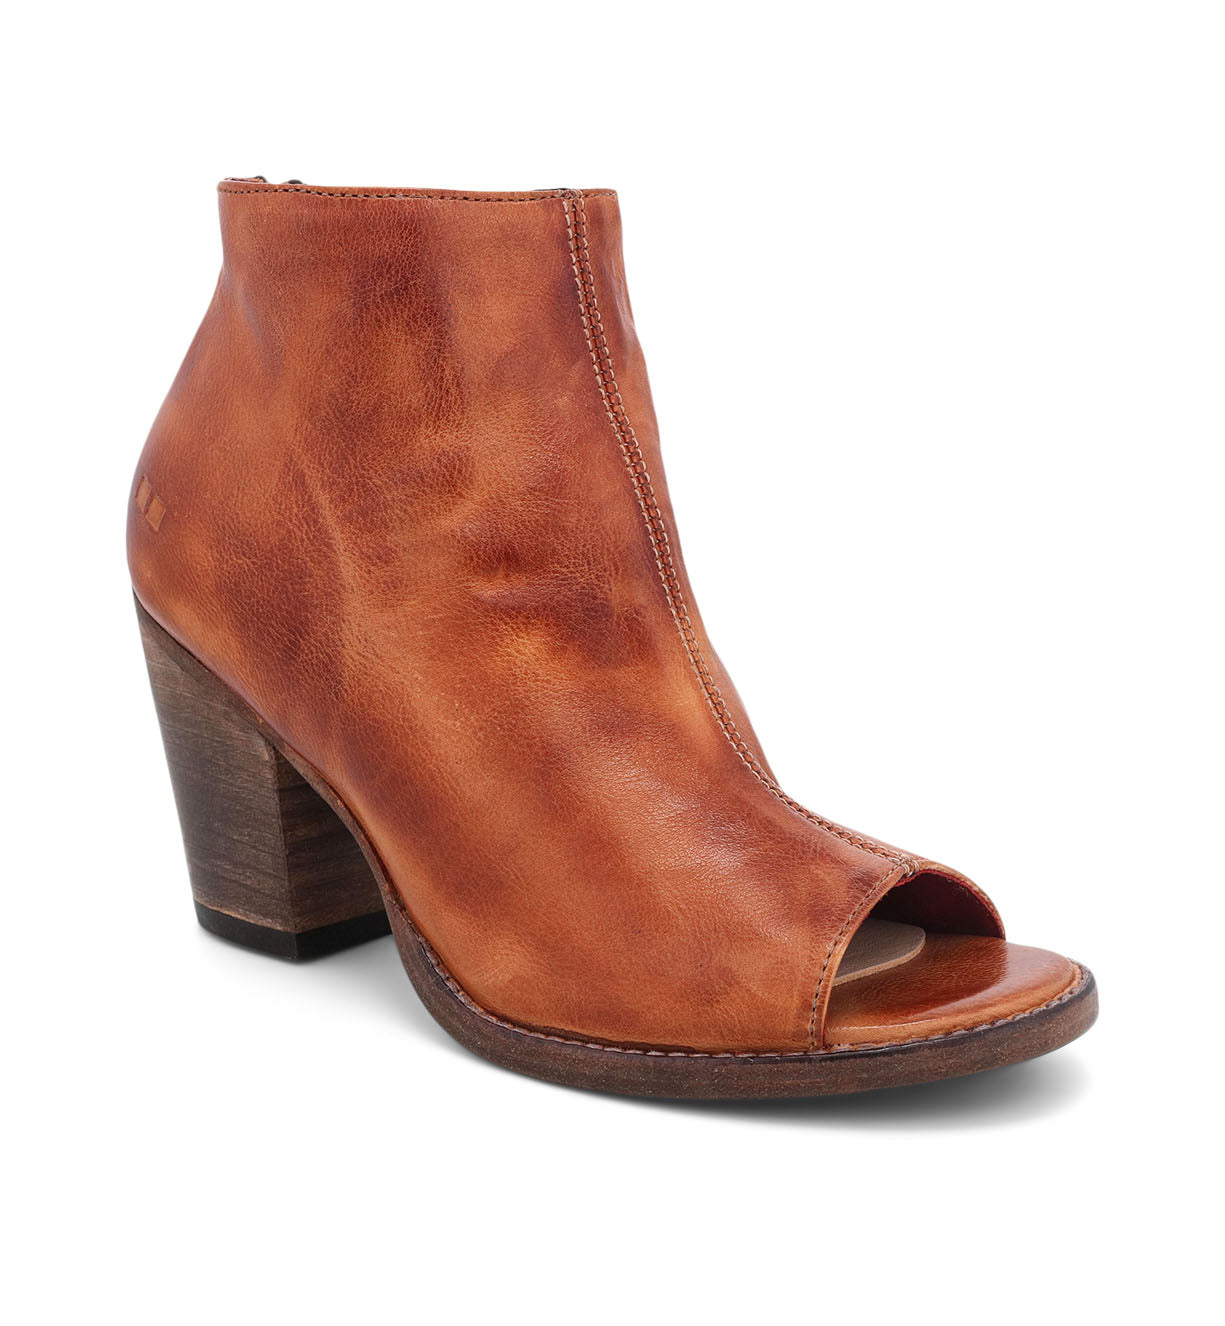 A women's Onset peep toe bootie with a wooden heel by Bed Stu.